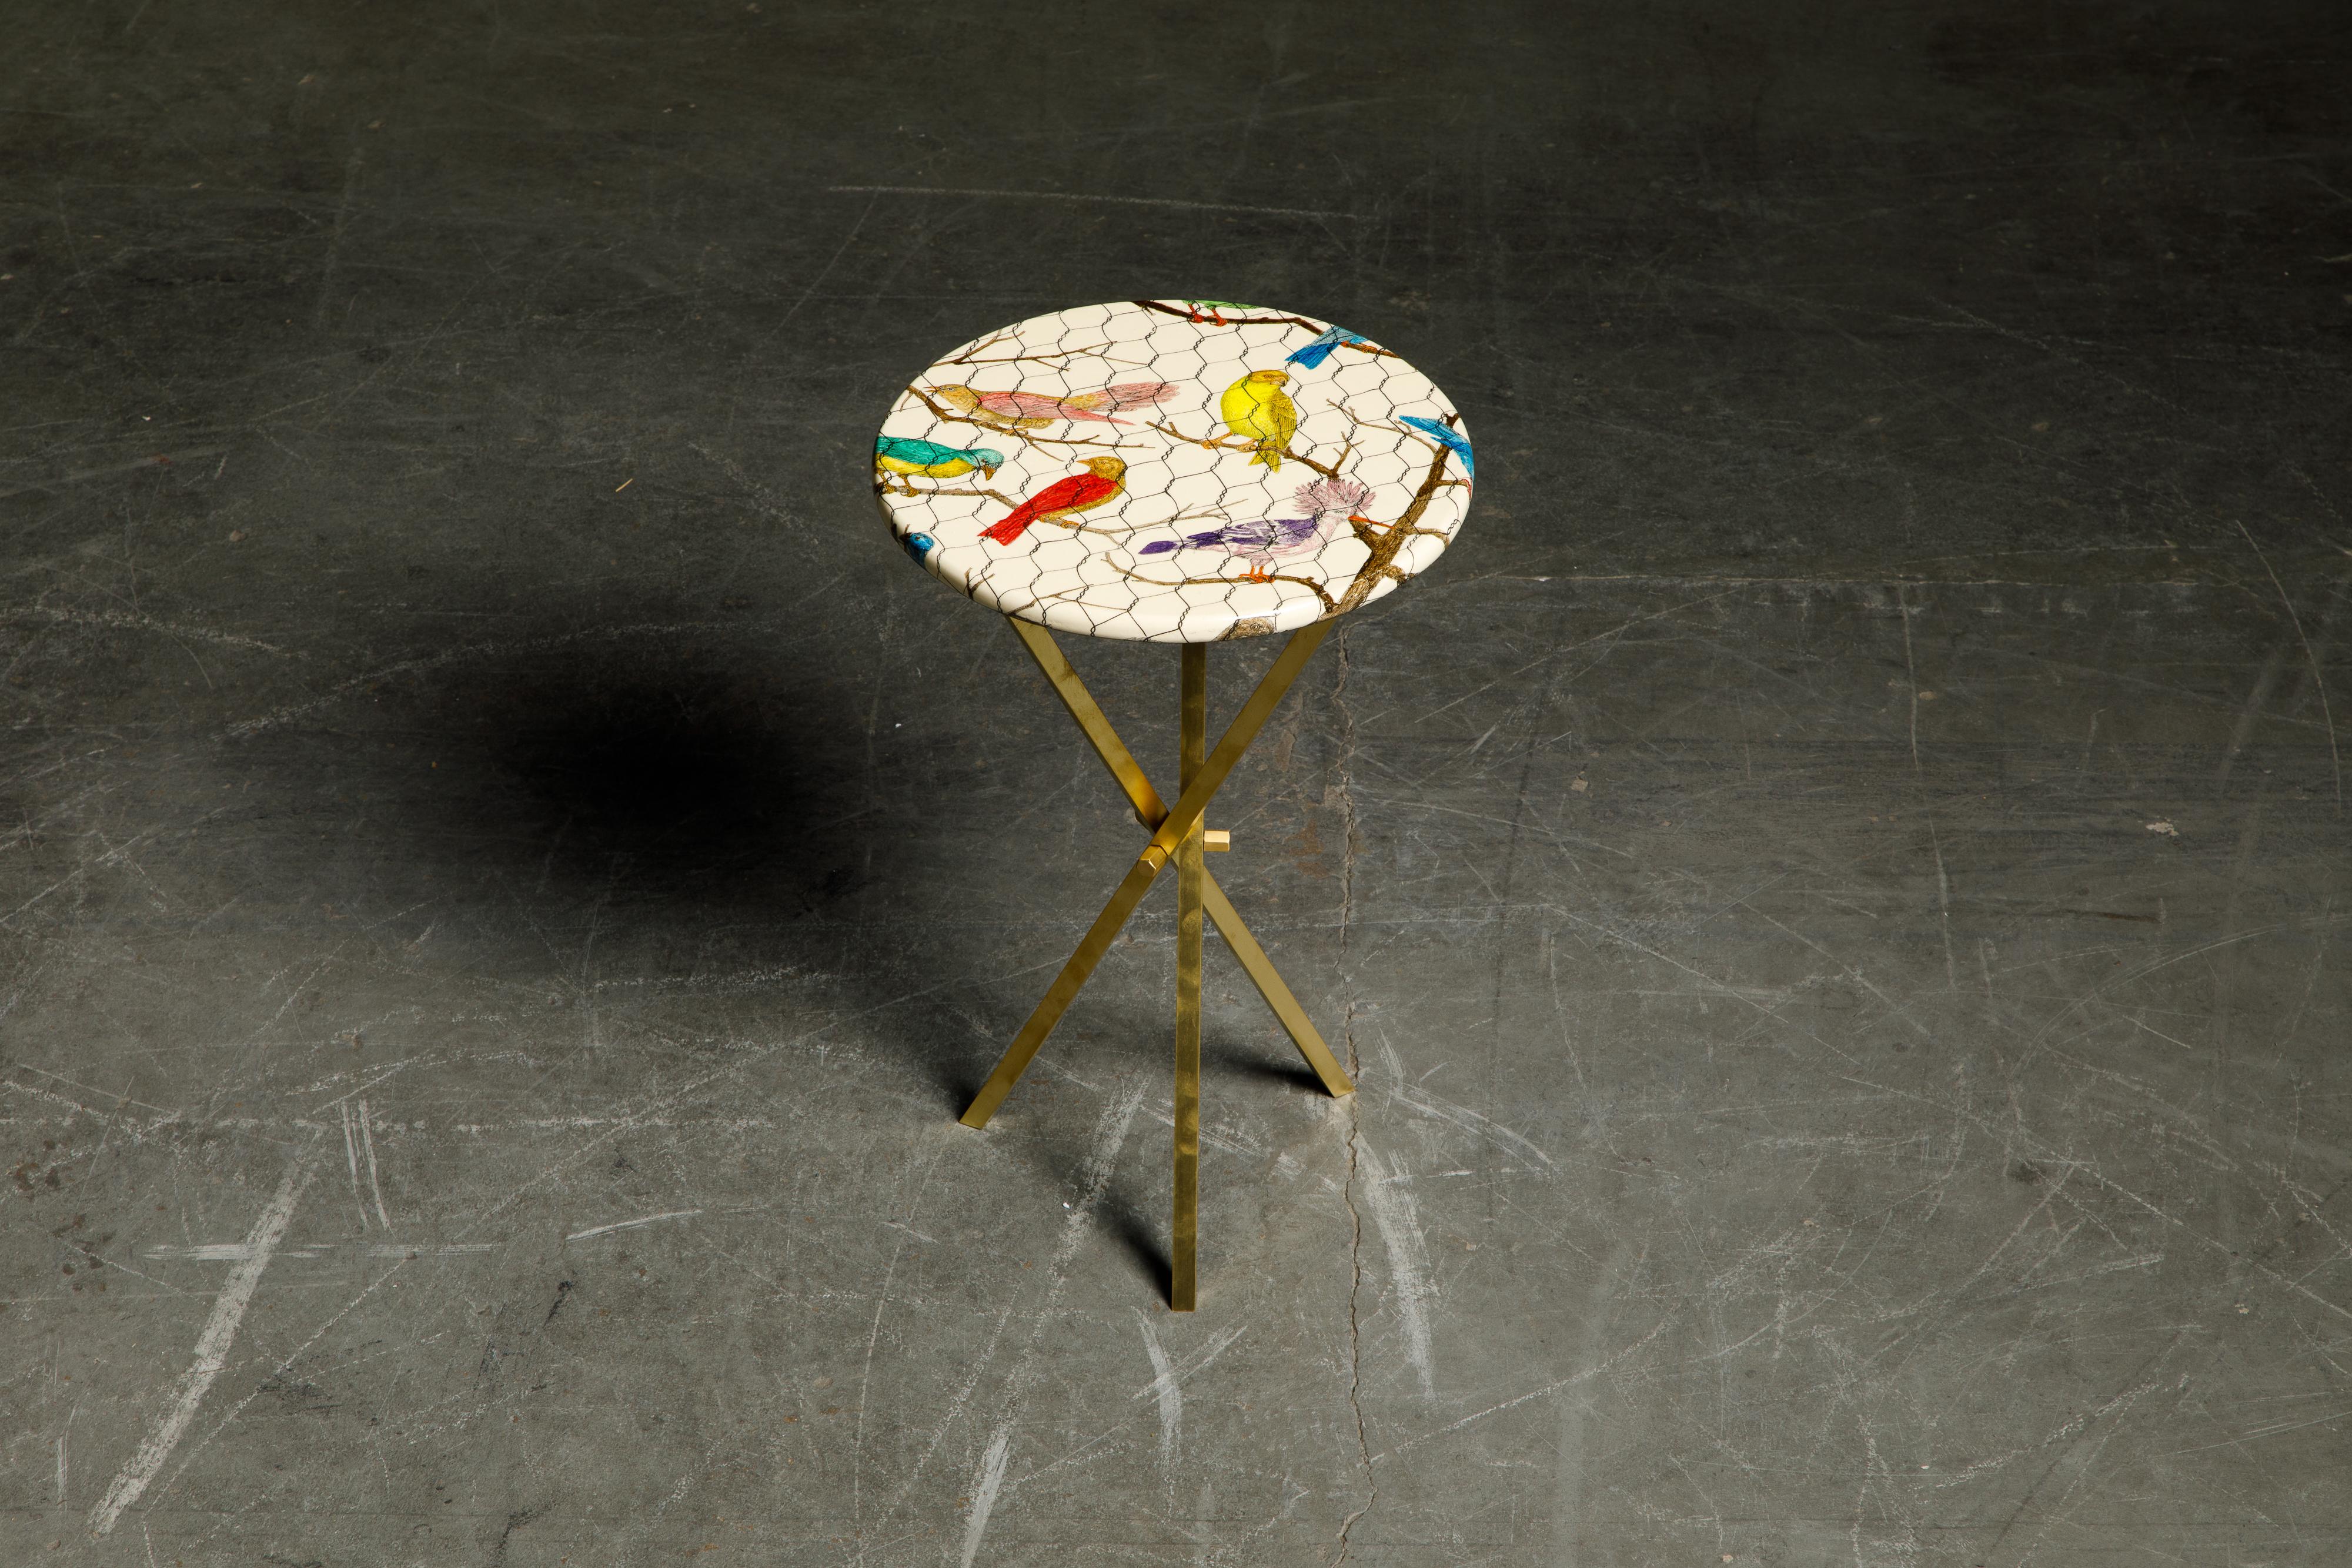 This gorgeous collectors item is a 'Uccelli Nella Gabbia' (Caged Birds in Italian) side table by Piero Fornasetti, signed underneath with its original label. This side table is made with lacquered wood that has birds within a wired cage over white